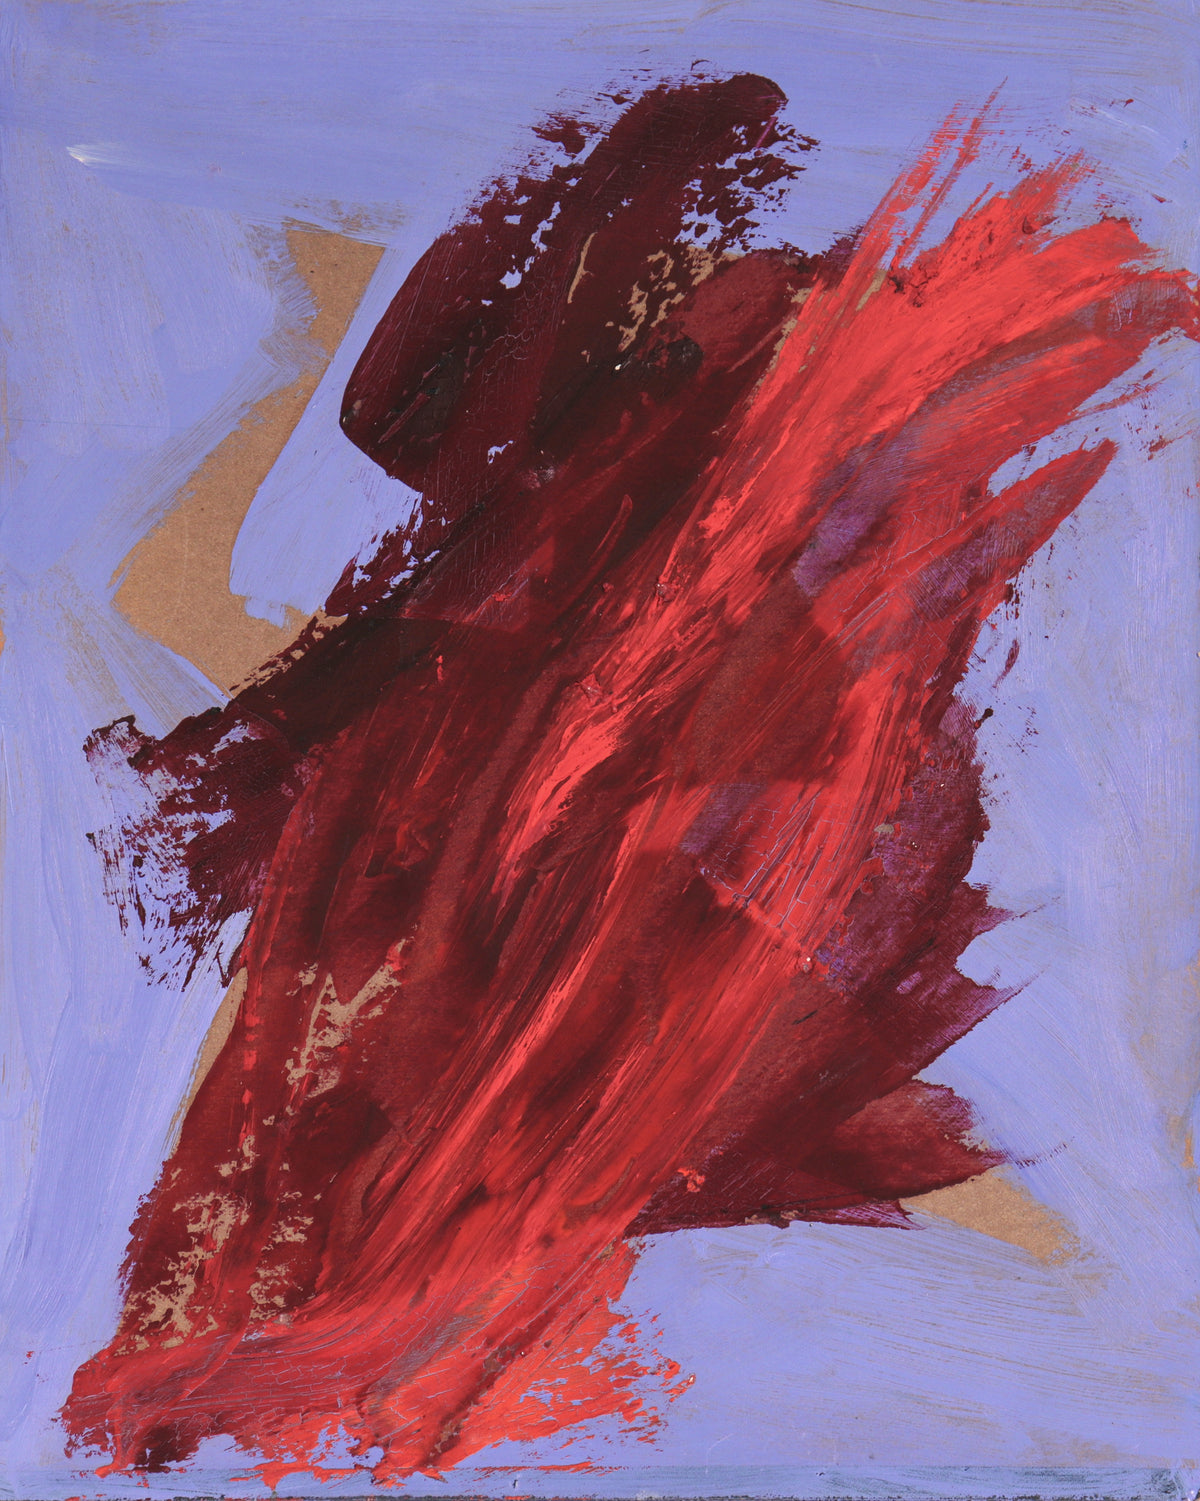 Bright &amp; Gestural Abstract&lt;br&gt; 20th Century Tempera Paint on Paper Board &lt;br&gt;&lt;br&gt;#C3947